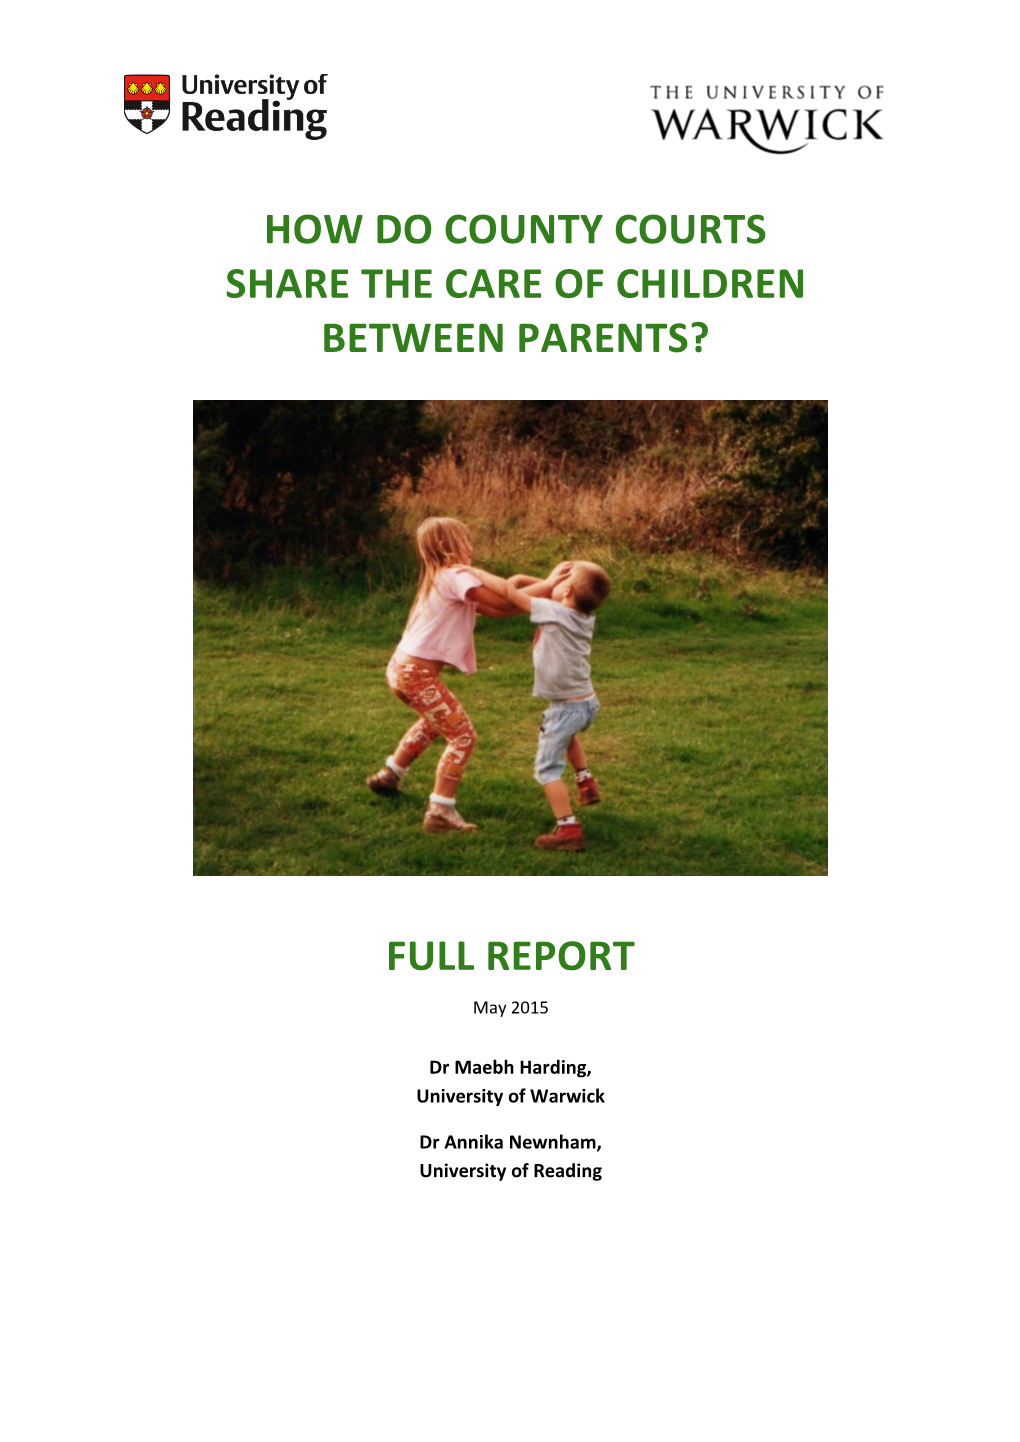 How Do County Courts Share the Care of Children